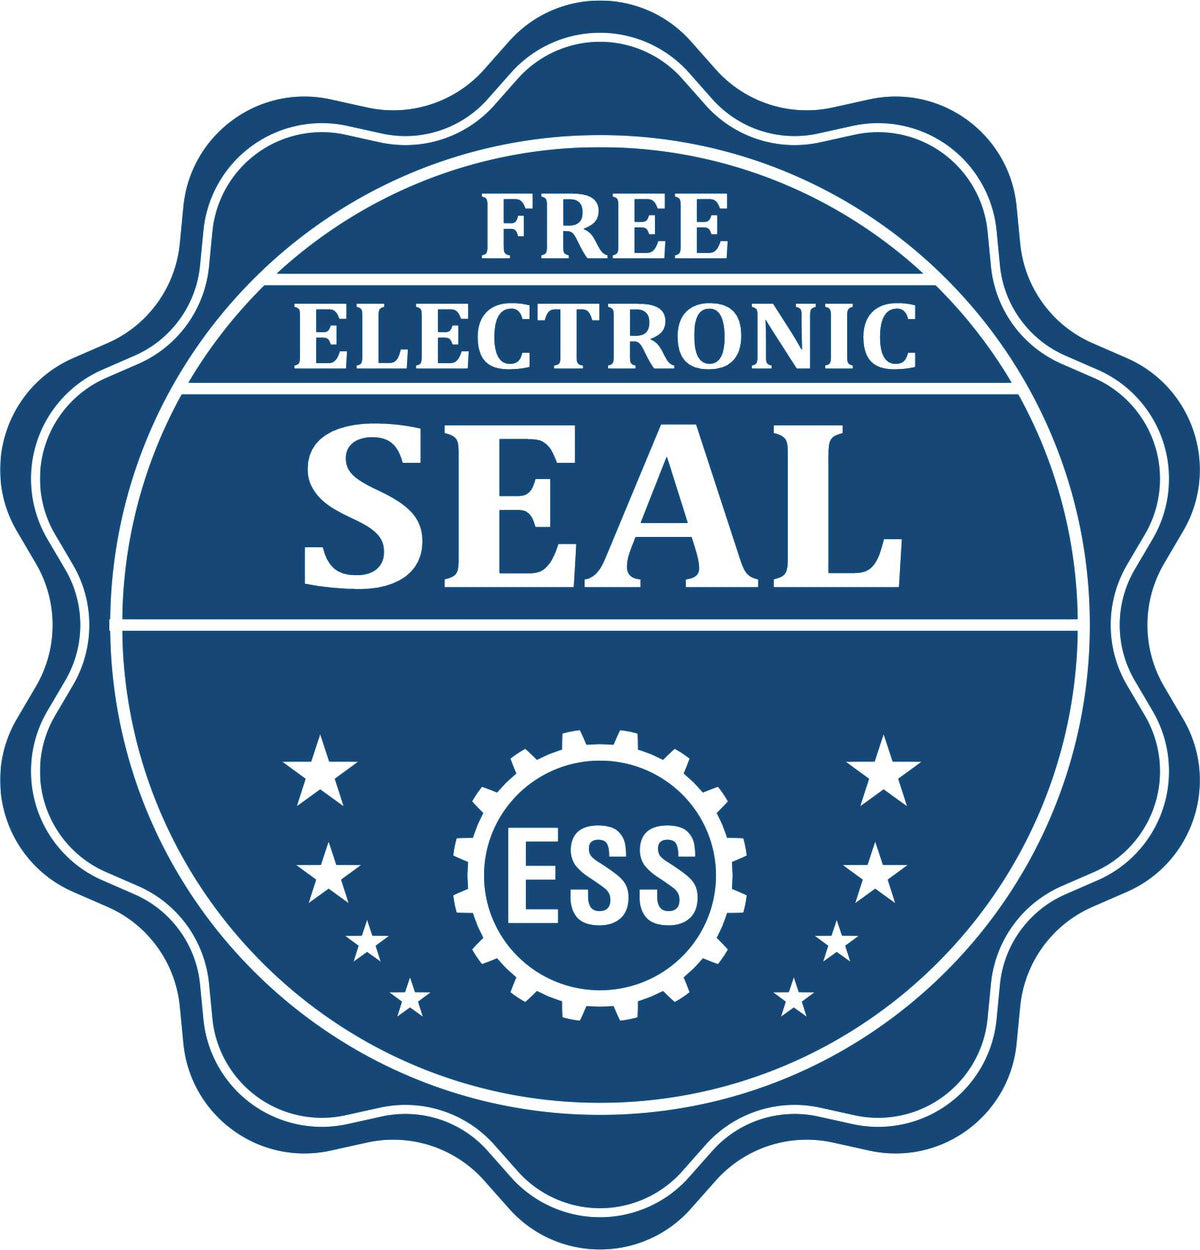 A badge showing a free electronic seal for the Long Reach Kansas Land Surveyor Seal with stars and the ESS gear on the emblem.